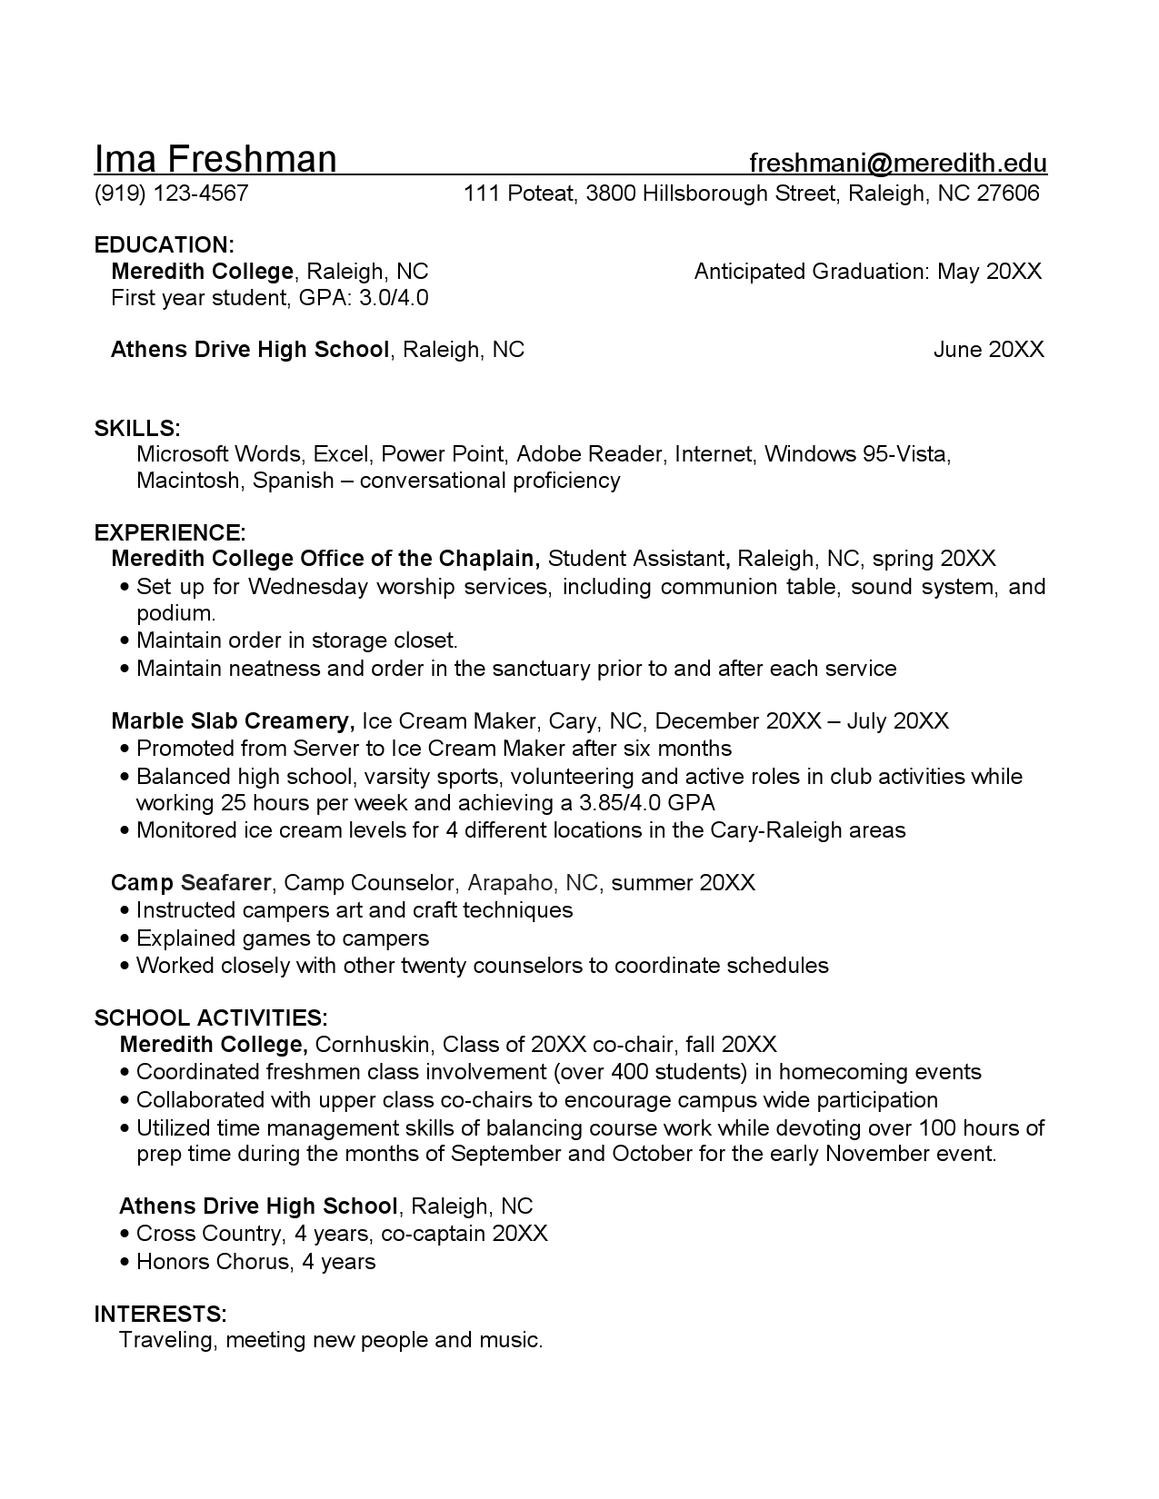 Resume Template for Freshman College Student Freshman Resume Sample by Meredith College Academic & Career …